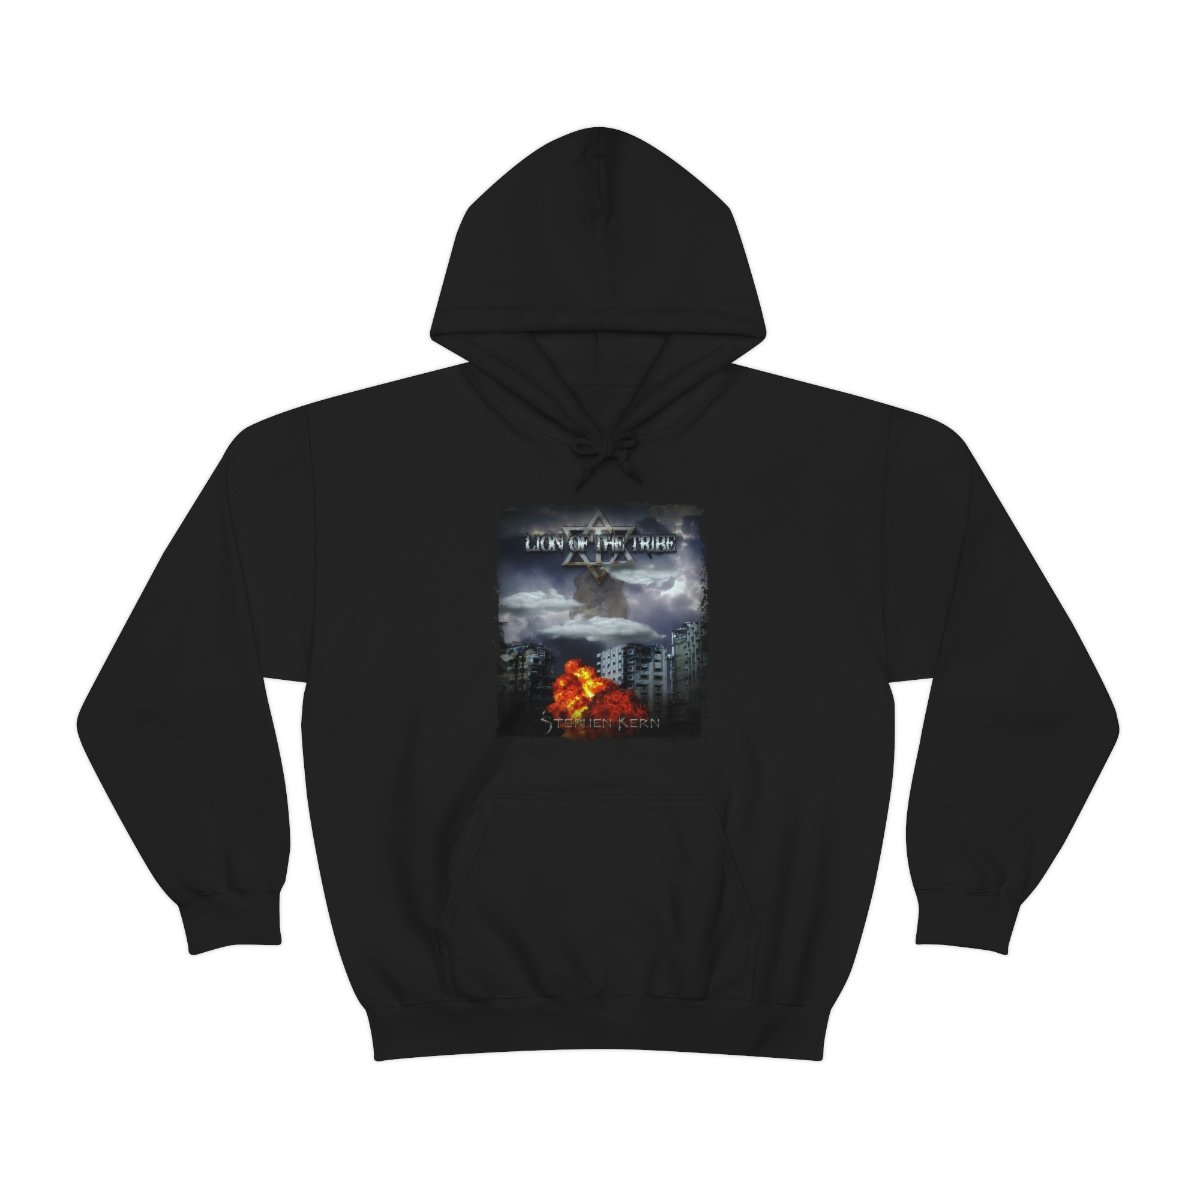 Stephen Kern – Lion of the Tribe Pullover Hooded Sweatshirt